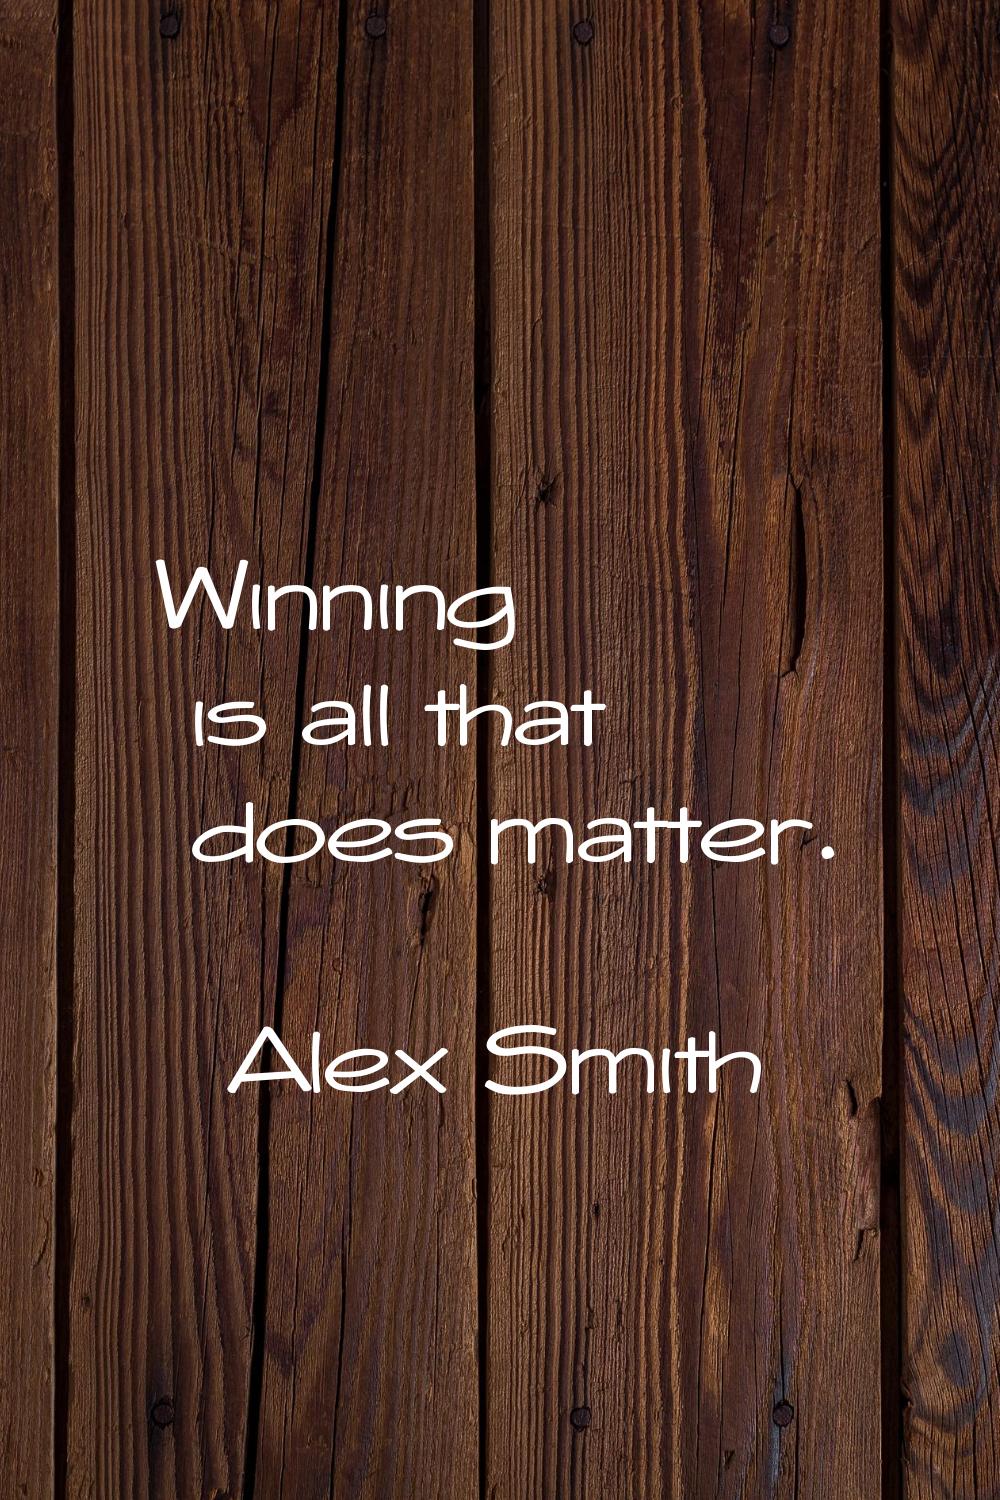 Winning is all that does matter.